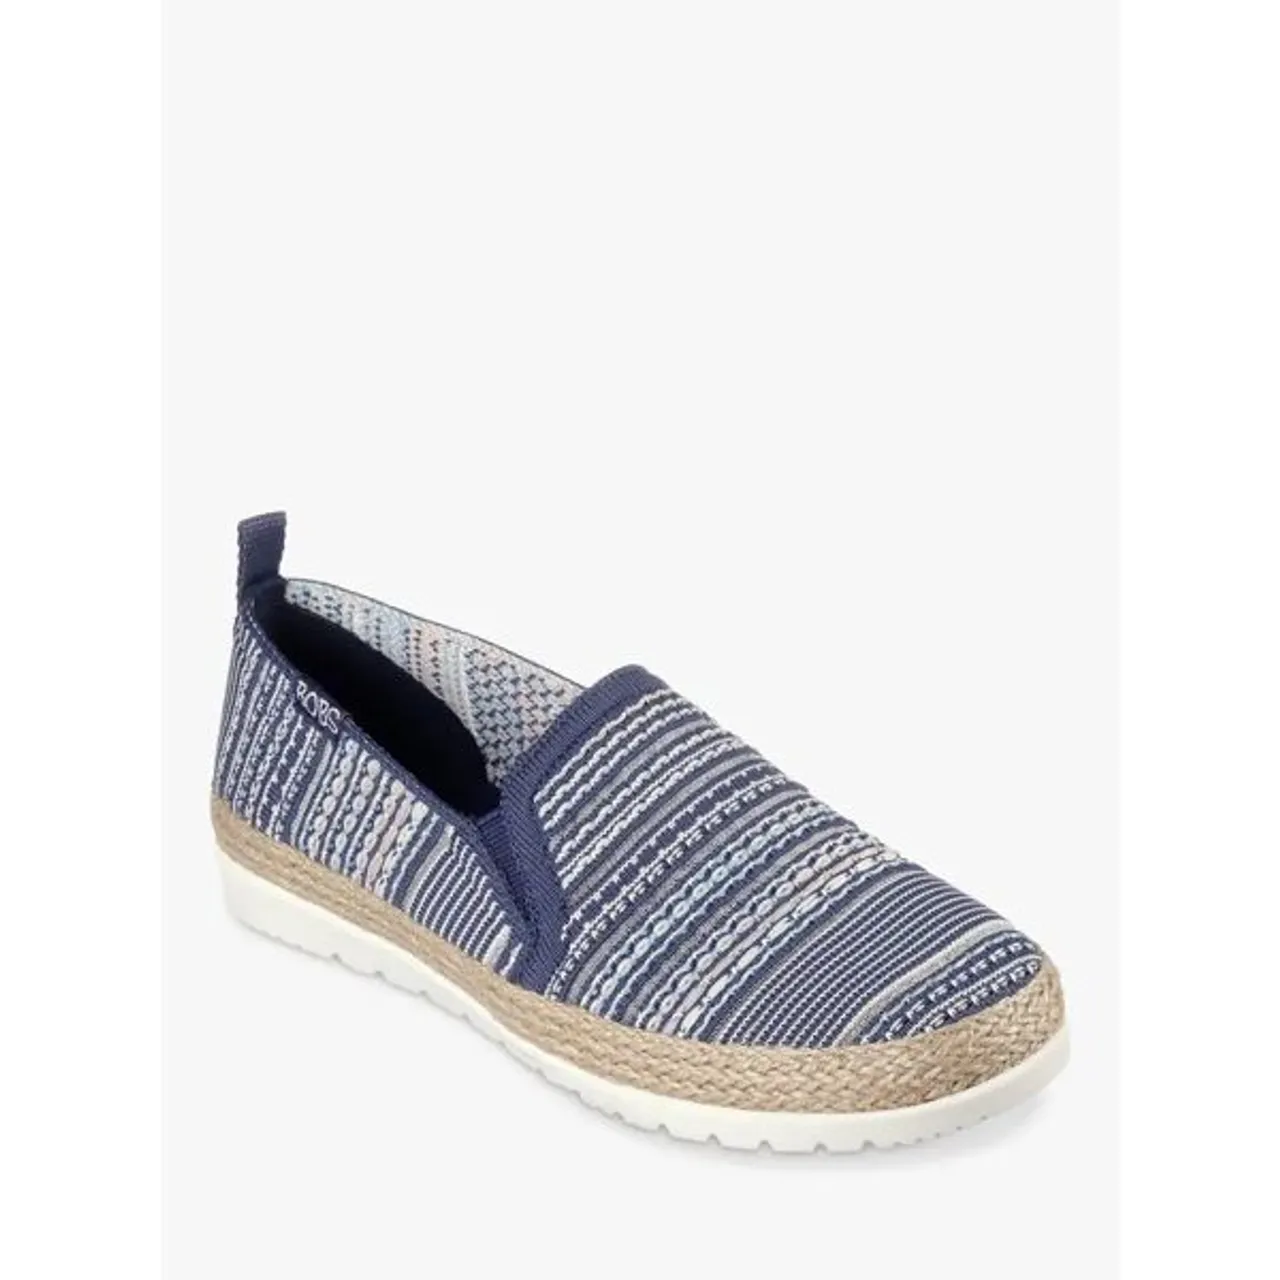 Skechers BOBS Flexpadrille 3.0 Island Muse Espadrille Shoes - Navy - Female